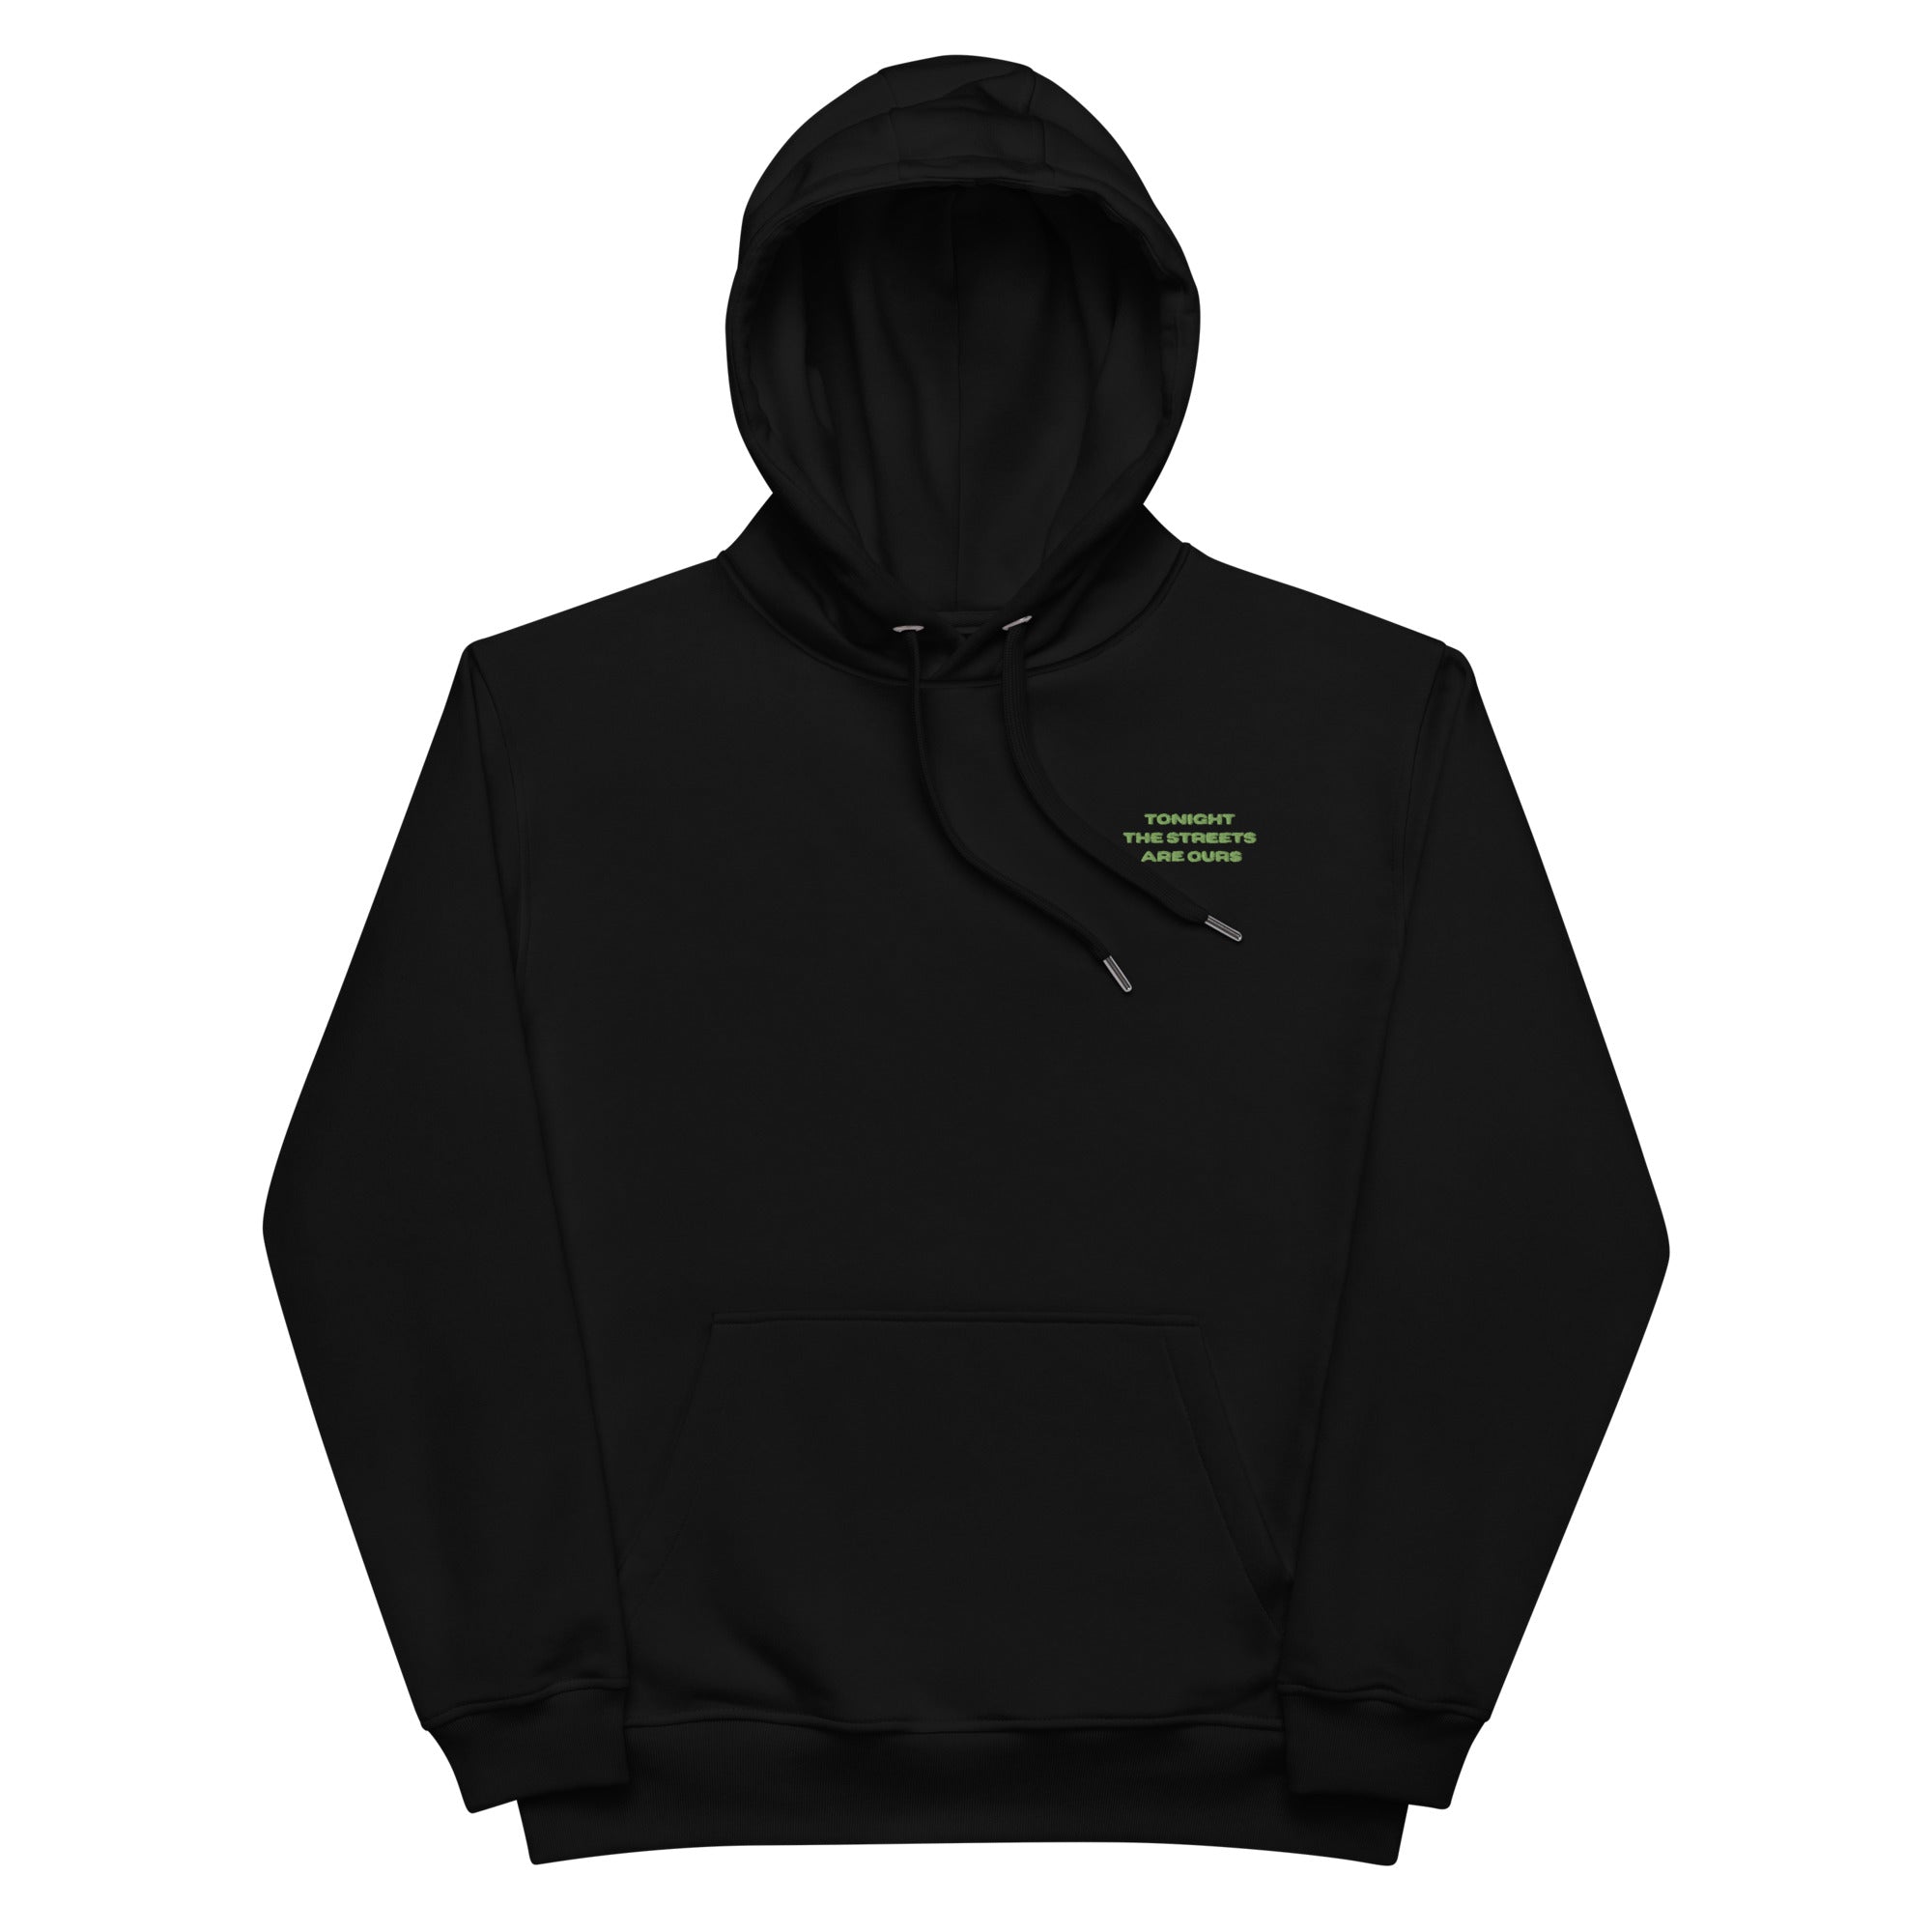 TONIGHT THE STREETS ARE OURS hoodie